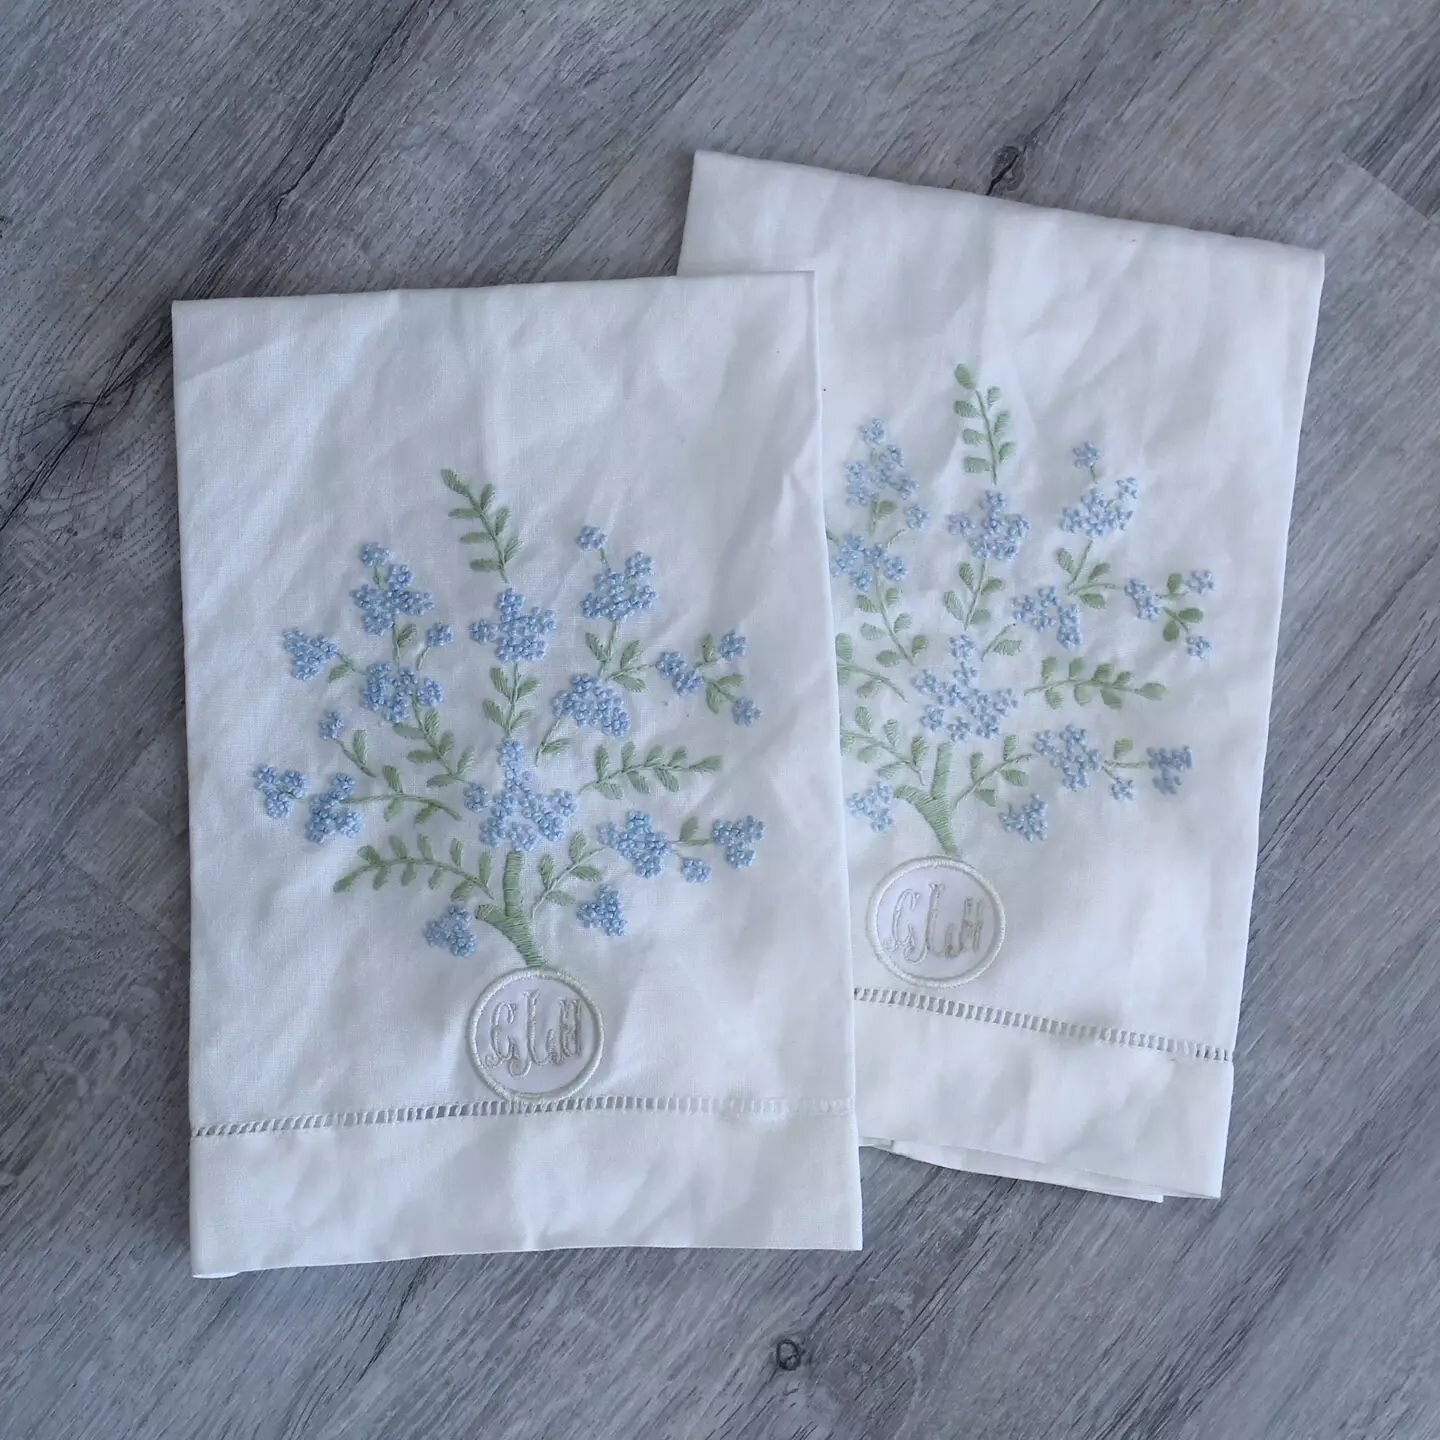 Personalized dinner napkins are an amazing addition to any special occasion! Whether it be a Christmas dinner with the family or a thoughtful gift to a newlywed, make the moment priceless!
.
.
.
.
.
#monogrameverythingregretnothing #atlanticembroider